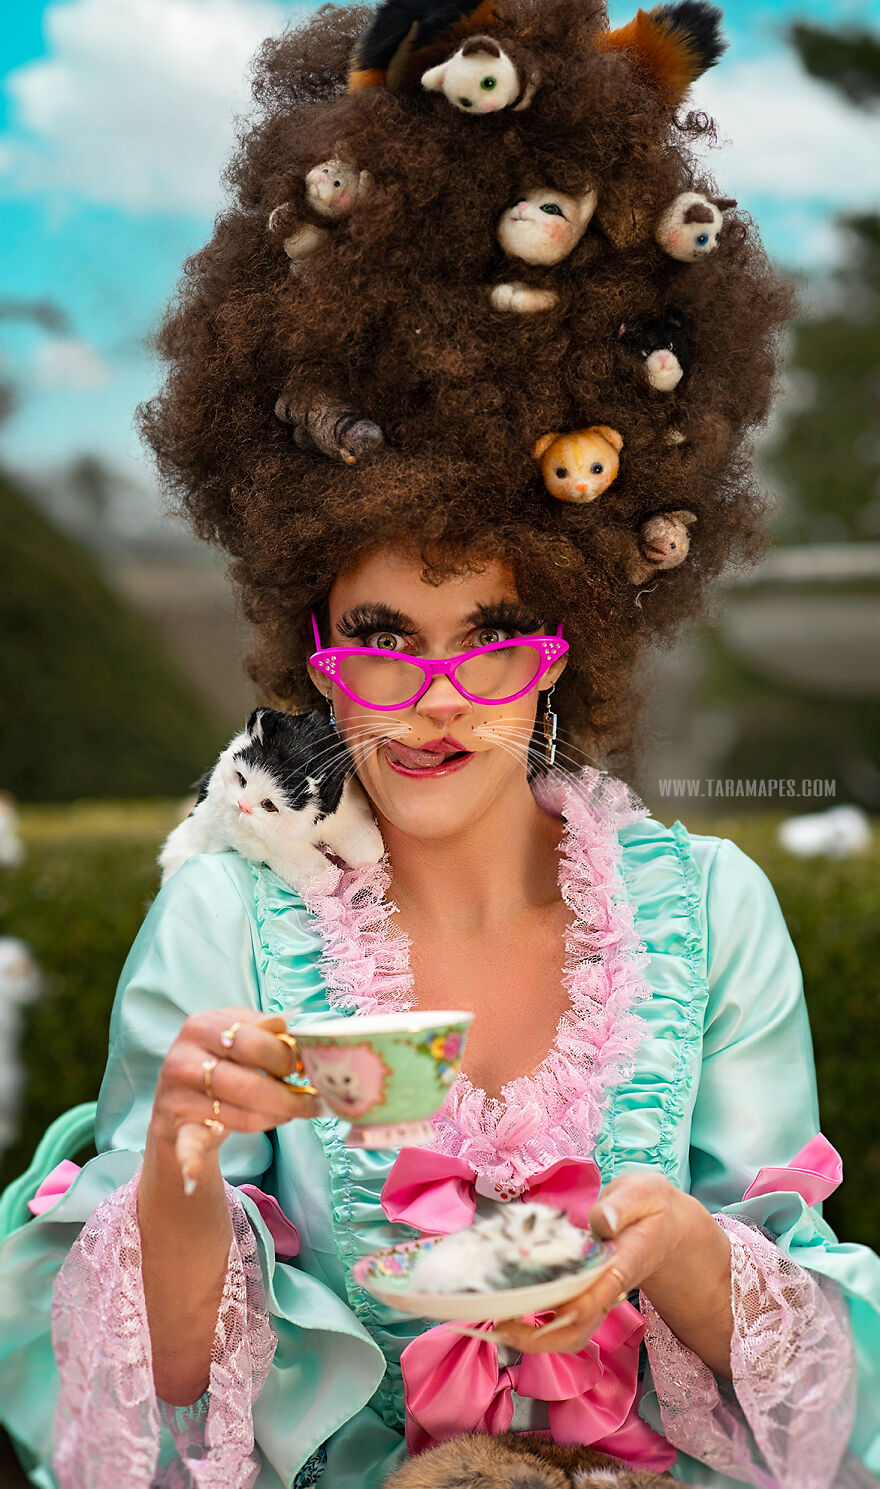 The Cat Lady: I Created A Themed Photoshoot Representing What A ‘Real ...